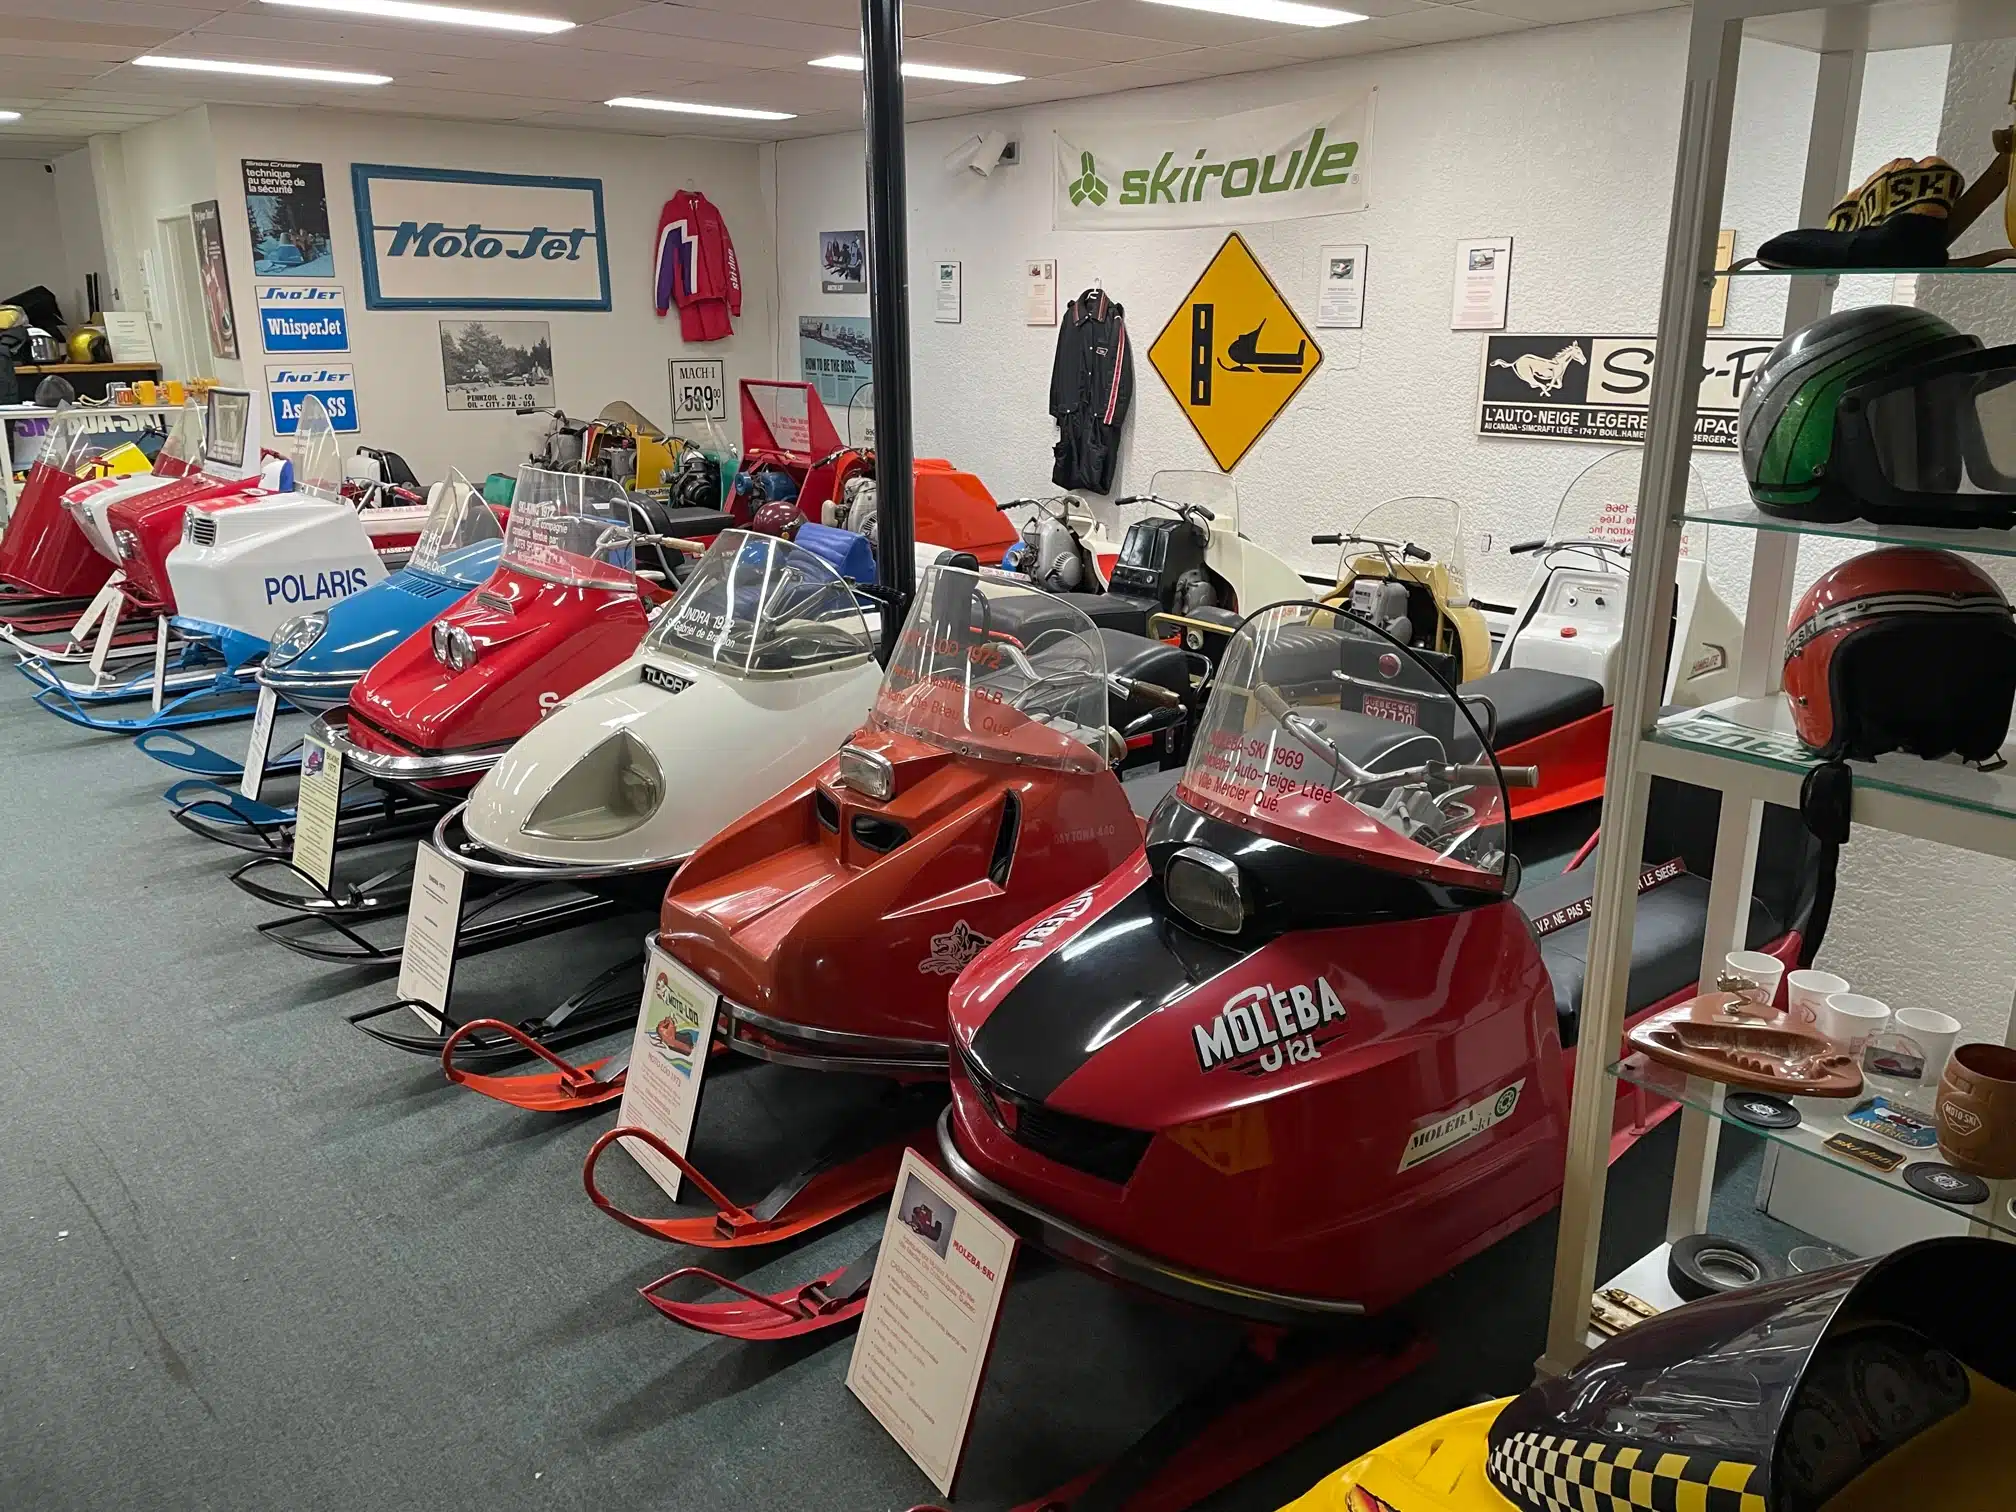 Just an example of Jacques Gauthier's antique snowmobile collection